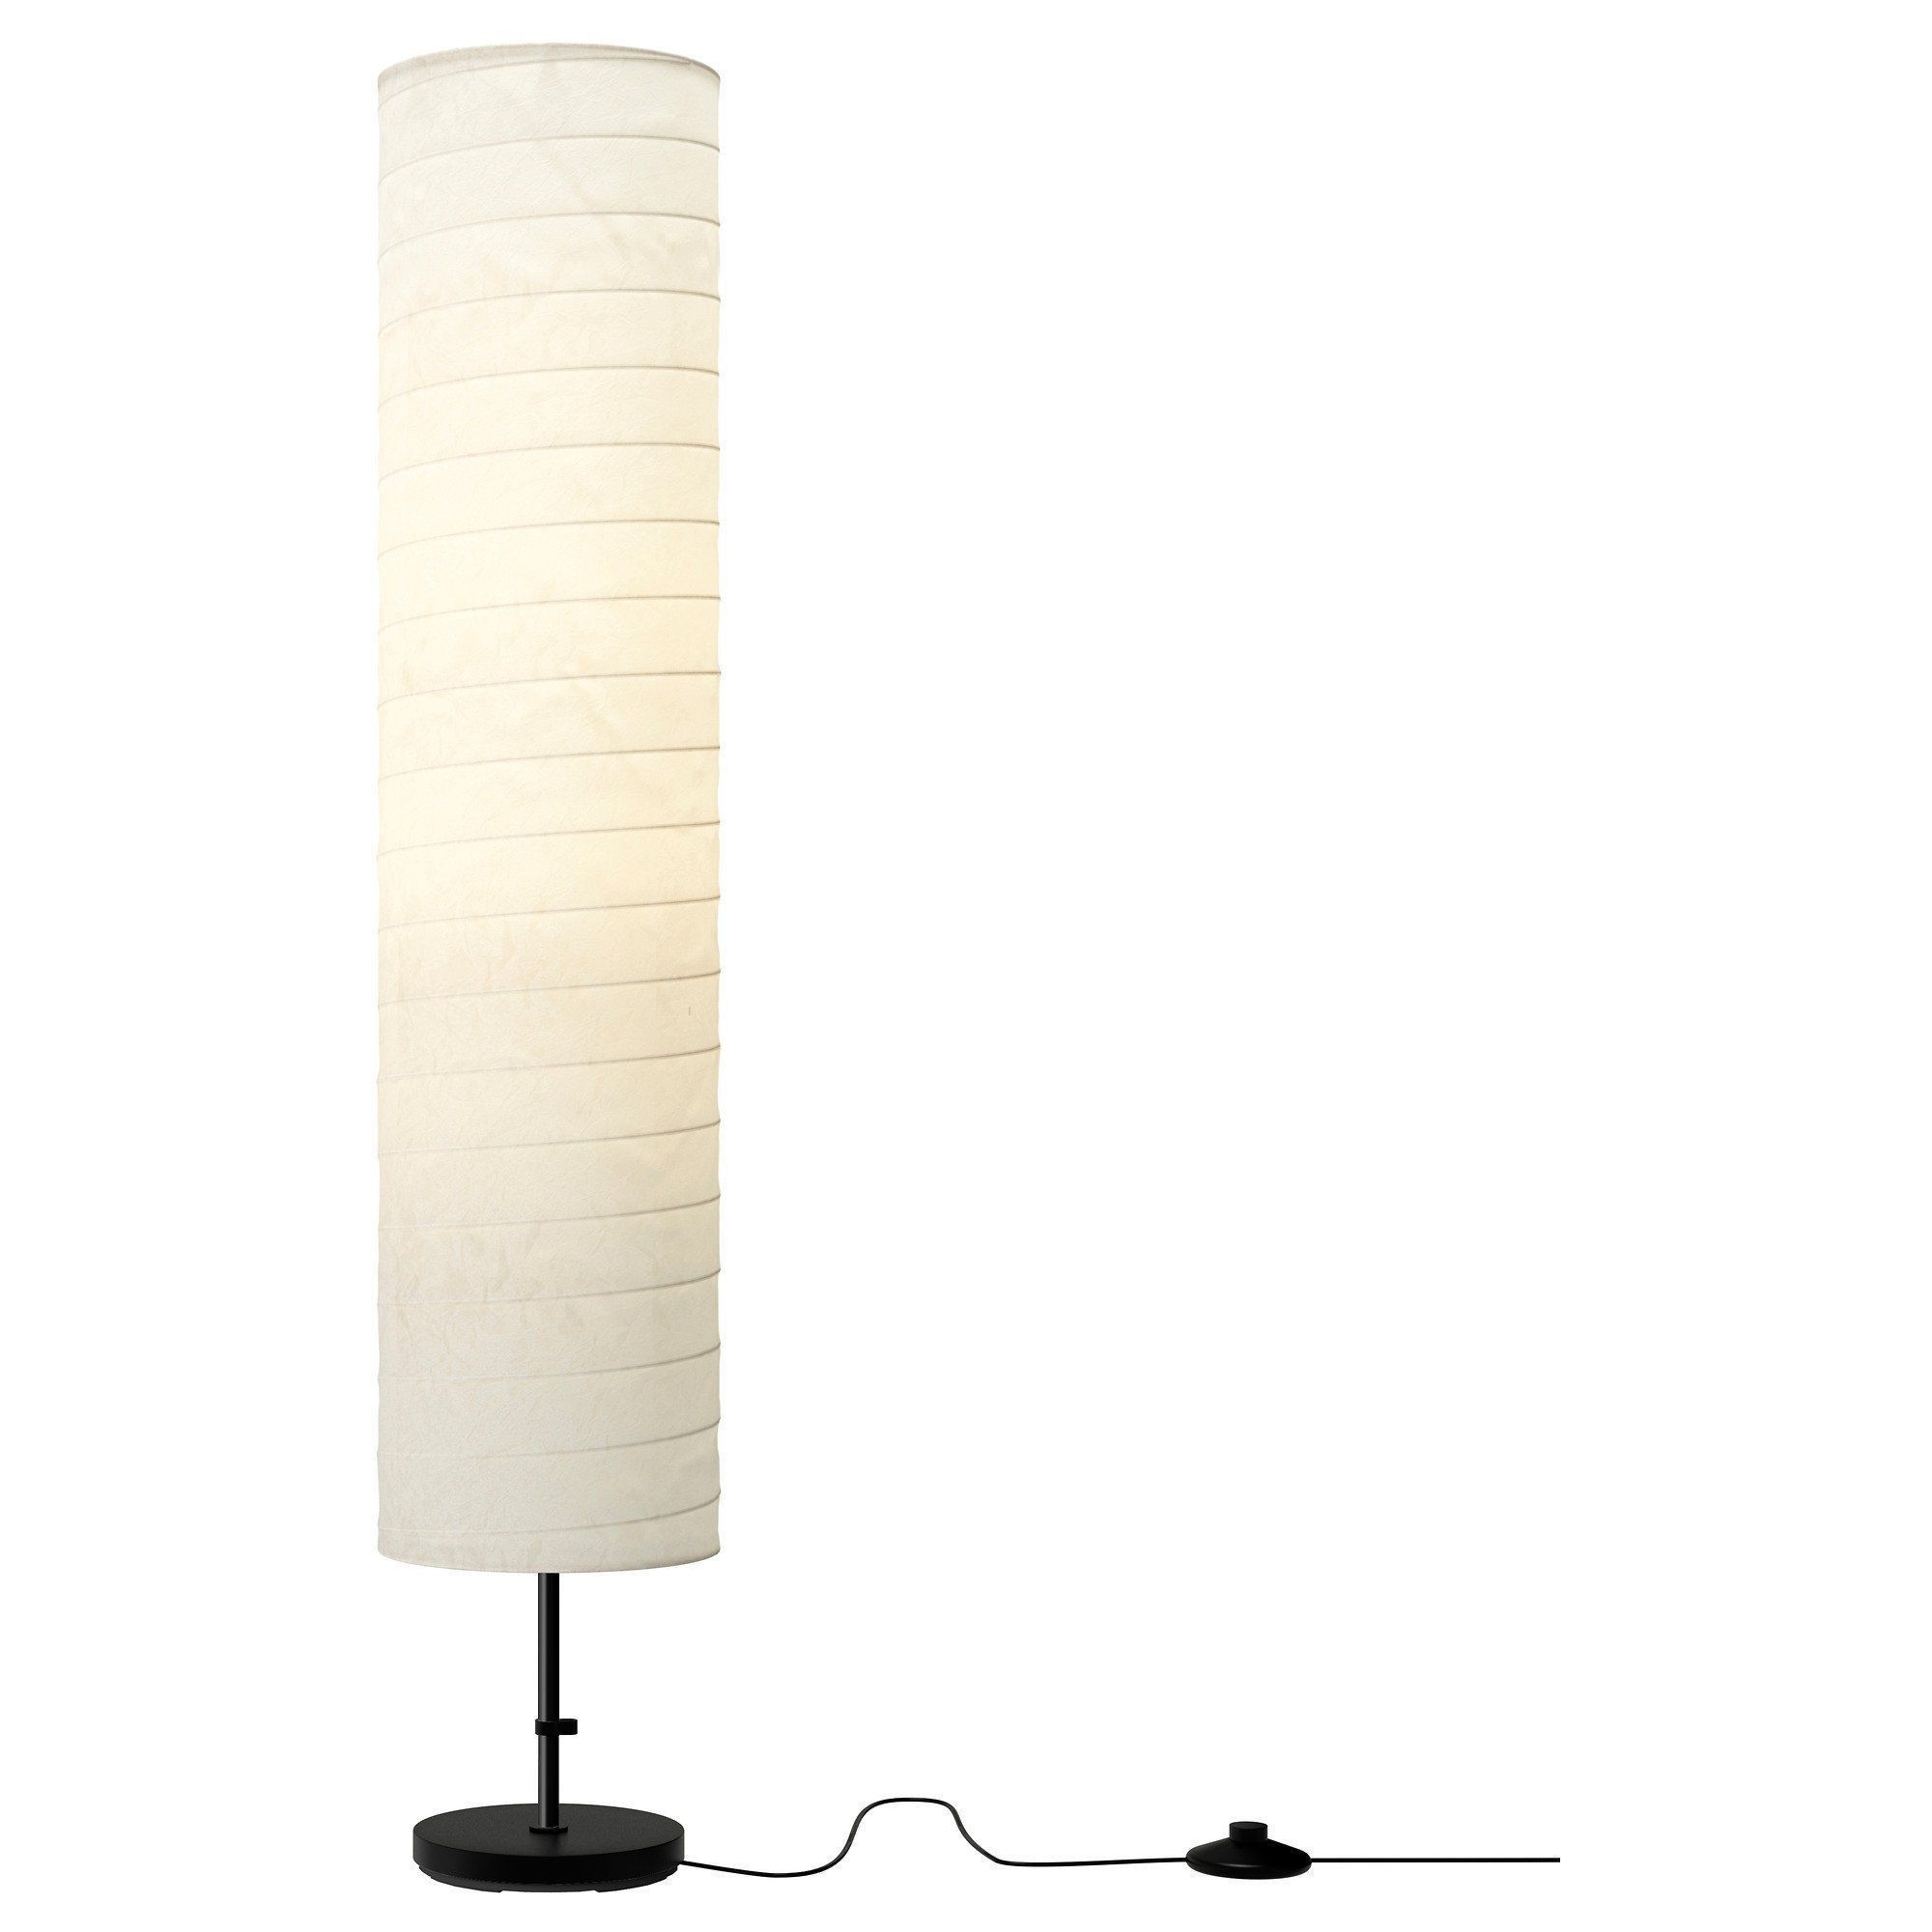 Best New Ikea Holmo Floor Lamp Light White Rice Paper Shade Modern Contemporary